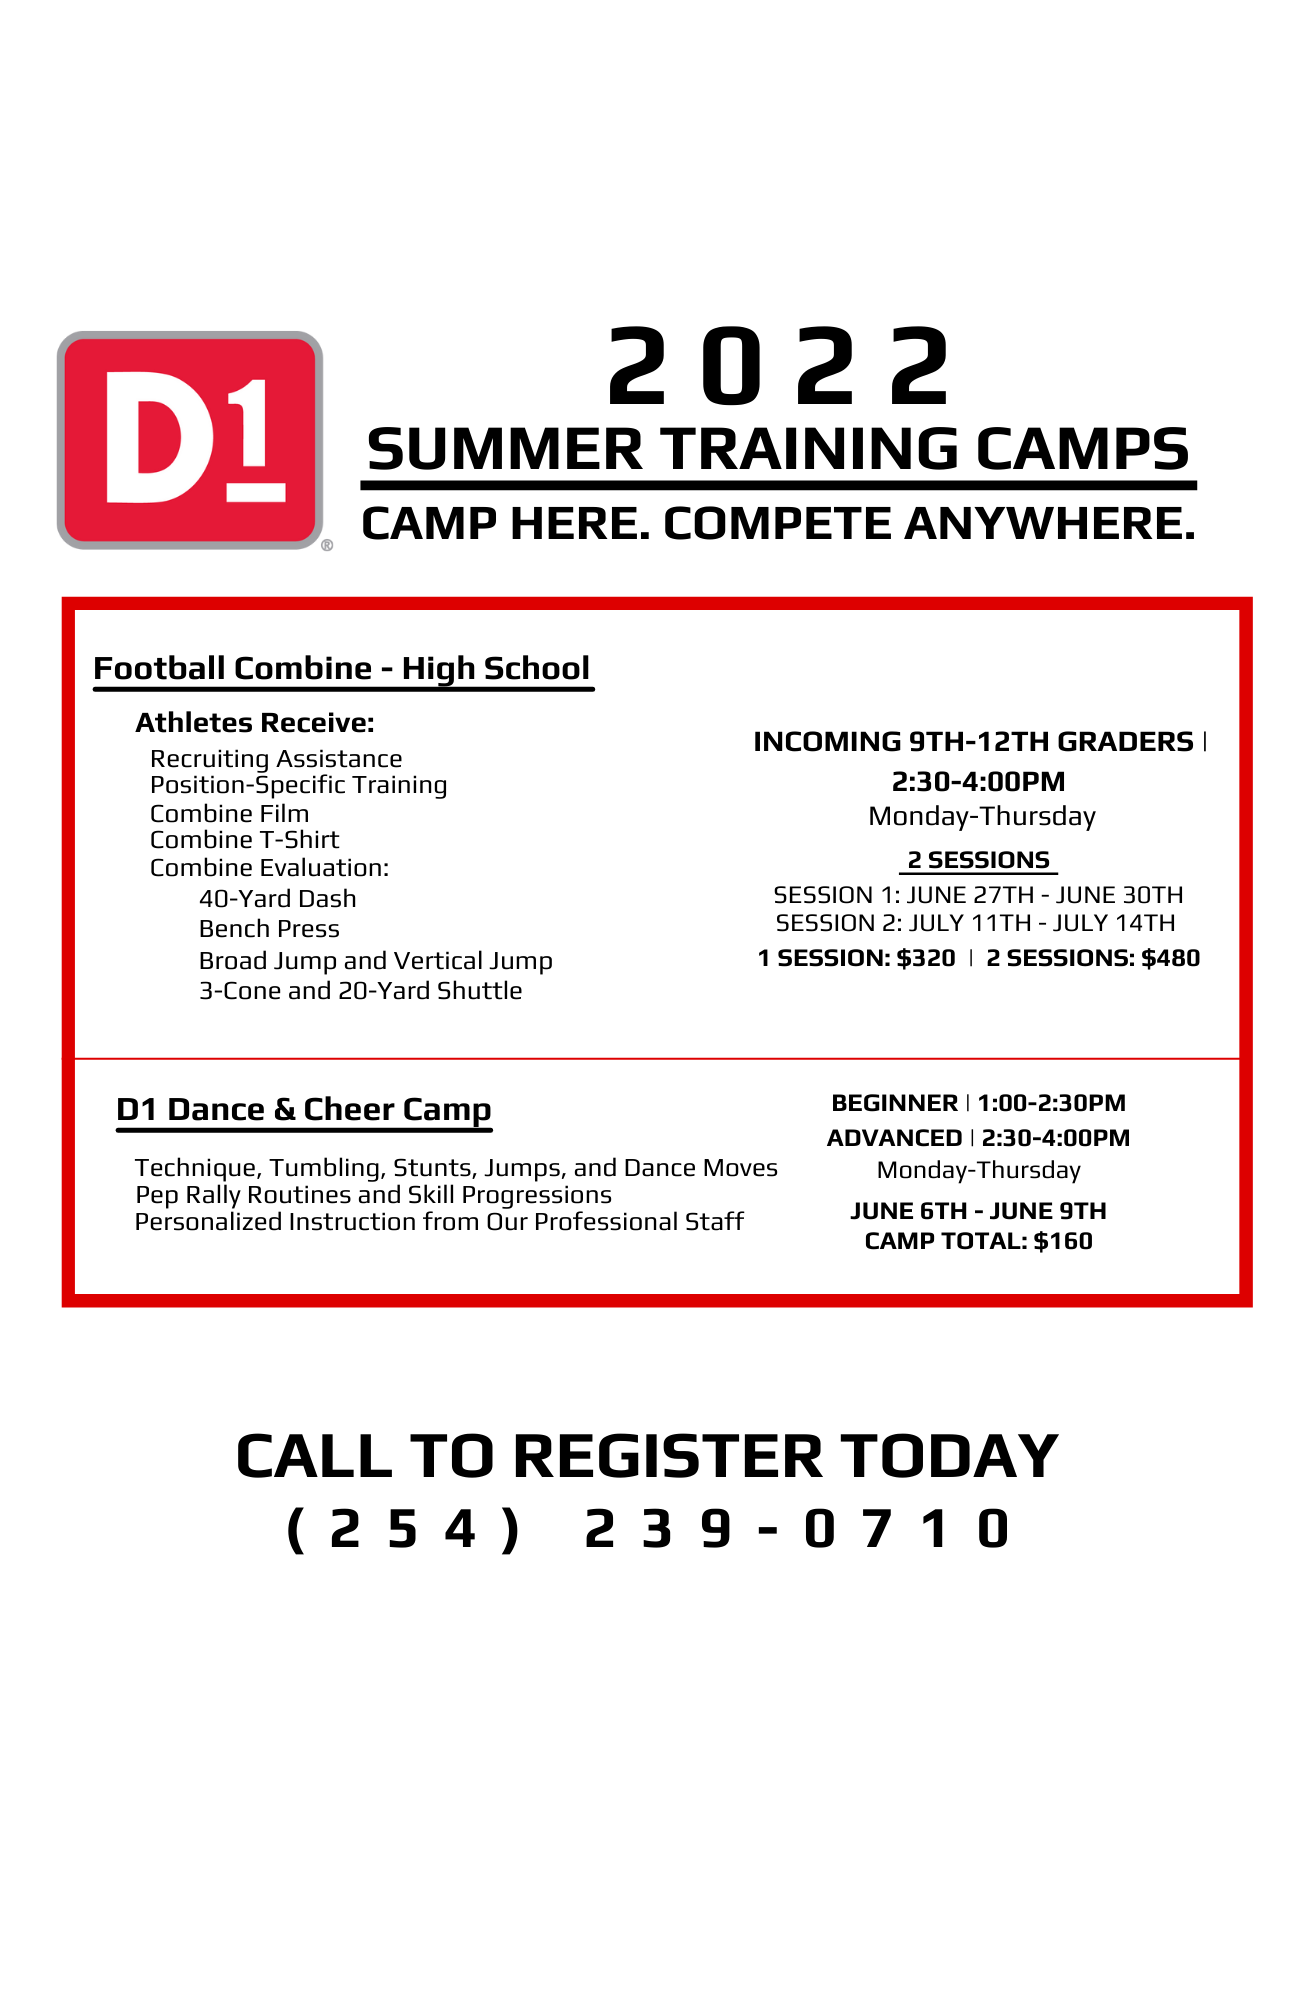 D1 2022 Summer Training Camps Offerings